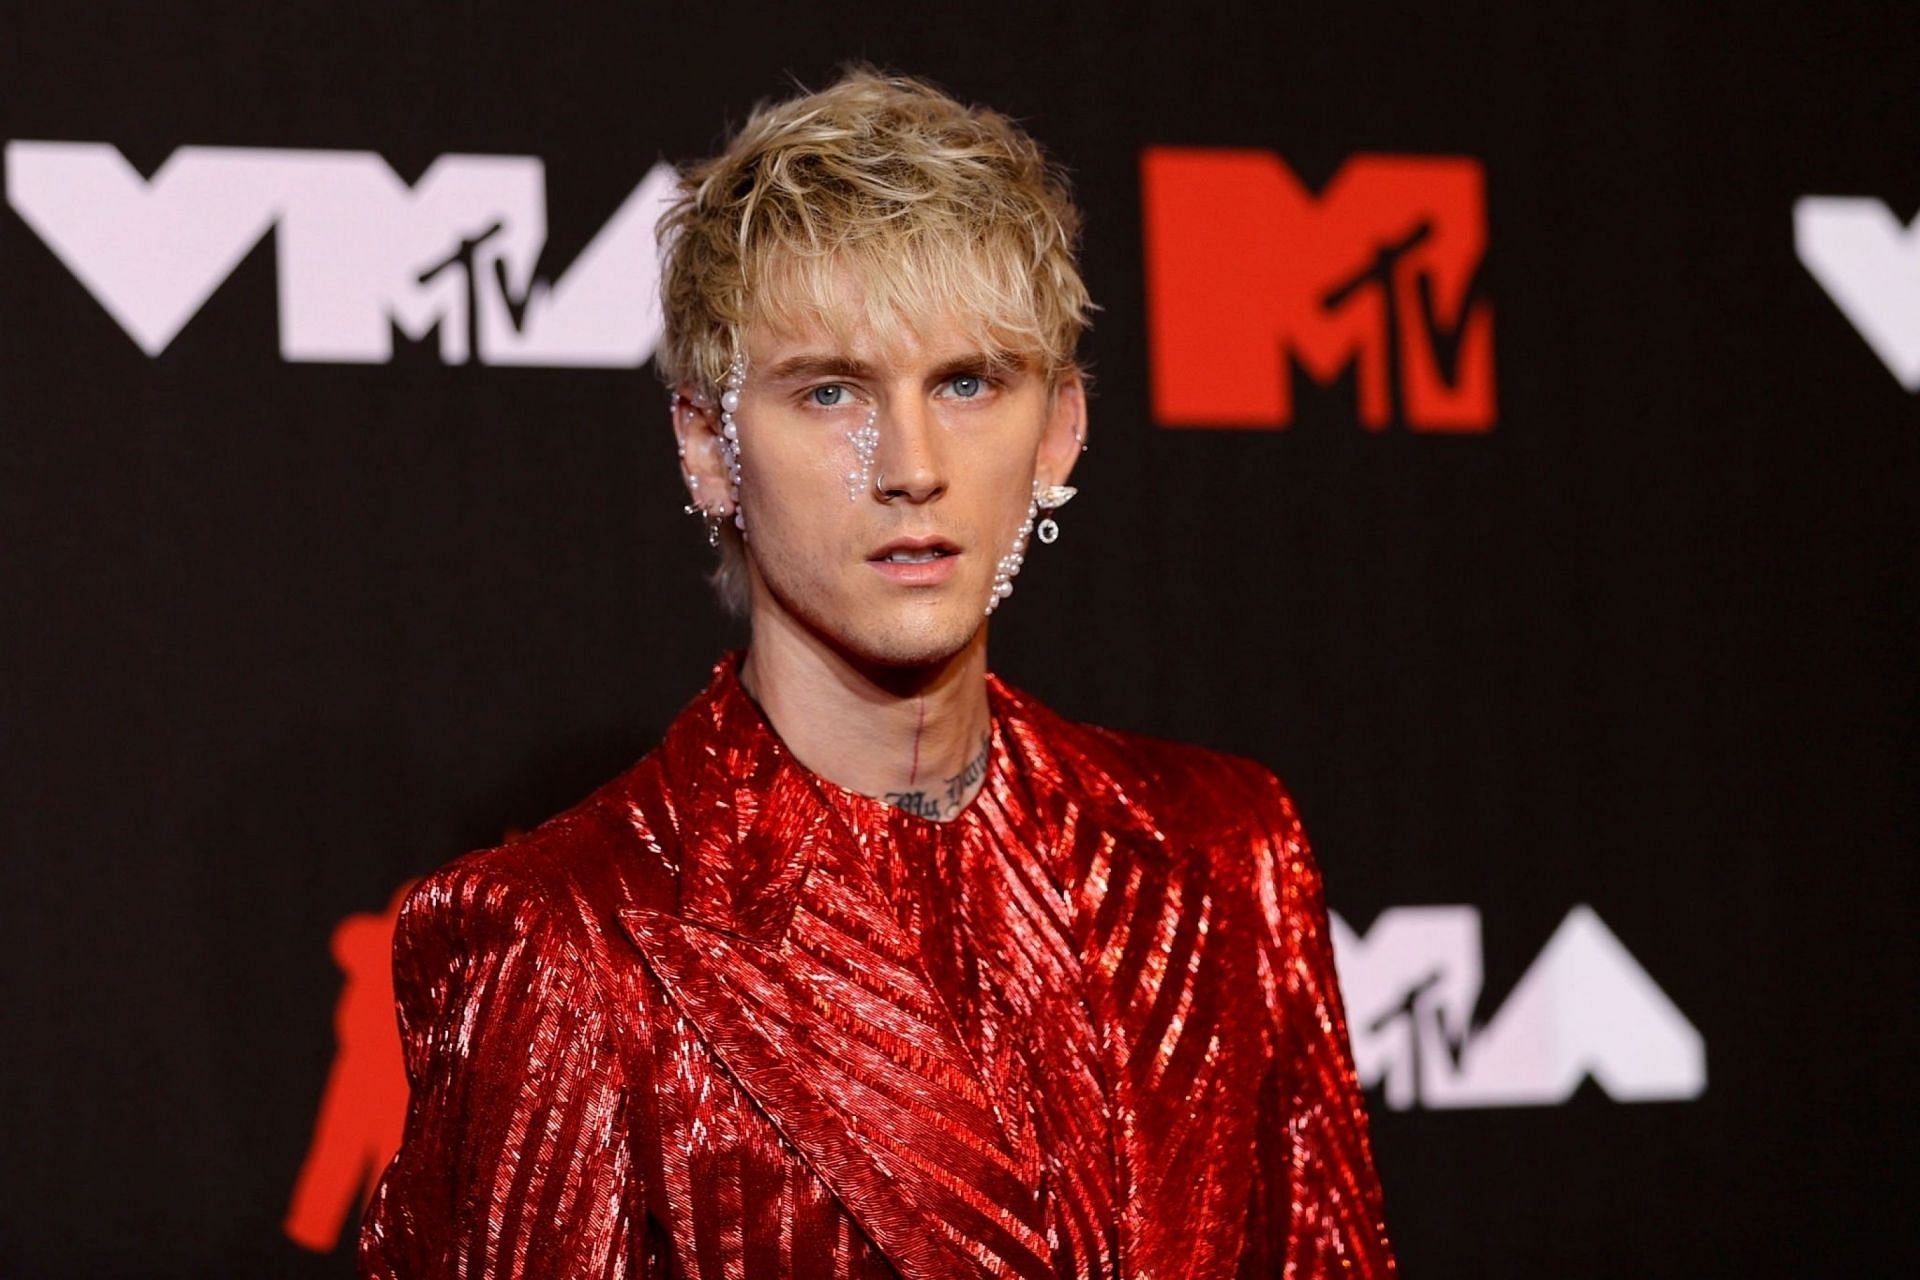 Machine Gun Kelly attends the 2021 MTV Video Music Awards at Barclays Center on September 12, 2021 in the Brooklyn borough of New York City.(Images via Getty Images)